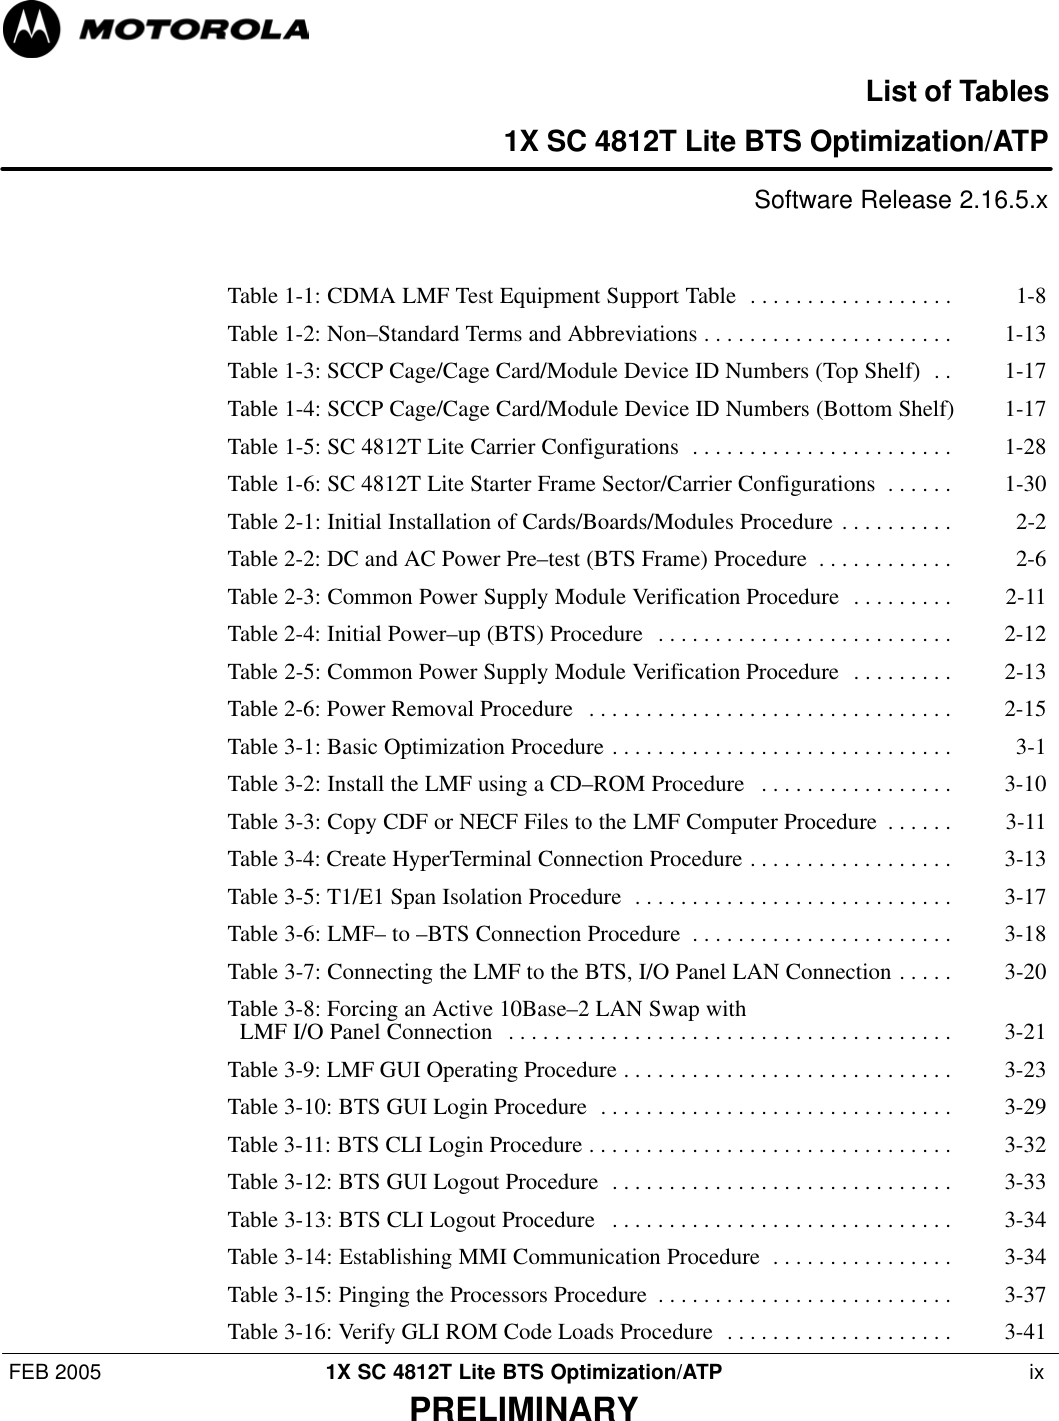 FEB 2005 1X SC 4812T Lite BTS Optimization/ATP  ixPRELIMINARYList of Tables1X SC 4812T Lite BTS Optimization/ATP Software Release 2.16.5.xTable 1-1: CDMA LMF Test Equipment Support Table 1-8 . . . . . . . . . . . . . . . . . . Table 1-2: Non–Standard Terms and Abbreviations 1-13 . . . . . . . . . . . . . . . . . . . . . . Table 1-3: SCCP Cage/Cage Card/Module Device ID Numbers (Top Shelf) 1-17 . . Table 1-4: SCCP Cage/Cage Card/Module Device ID Numbers (Bottom Shelf) 1-17 Table 1-5: SC 4812T Lite Carrier Configurations 1-28 . . . . . . . . . . . . . . . . . . . . . . . Table 1-6: SC 4812T Lite Starter Frame Sector/Carrier Configurations 1-30 . . . . . . Table 2-1: Initial Installation of Cards/Boards/Modules Procedure 2-2 . . . . . . . . . . Table 2-2: DC and AC Power Pre–test (BTS Frame) Procedure 2-6 . . . . . . . . . . . . Table 2-3: Common Power Supply Module Verification Procedure 2-11 . . . . . . . . . Table 2-4: Initial Power–up (BTS) Procedure 2-12 . . . . . . . . . . . . . . . . . . . . . . . . . . Table 2-5: Common Power Supply Module Verification Procedure 2-13 . . . . . . . . . Table 2-6: Power Removal Procedure 2-15 . . . . . . . . . . . . . . . . . . . . . . . . . . . . . . . . Table 3-1: Basic Optimization Procedure 3-1 . . . . . . . . . . . . . . . . . . . . . . . . . . . . . . Table 3-2: Install the LMF using a CD–ROM Procedure 3-10 . . . . . . . . . . . . . . . . . Table 3-3: Copy CDF or NECF Files to the LMF Computer Procedure 3-11 . . . . . . Table 3-4: Create HyperTerminal Connection Procedure 3-13 . . . . . . . . . . . . . . . . . . Table 3-5: T1/E1 Span Isolation Procedure 3-17 . . . . . . . . . . . . . . . . . . . . . . . . . . . . Table 3-6: LMF– to –BTS Connection Procedure 3-18 . . . . . . . . . . . . . . . . . . . . . . . Table 3-7: Connecting the LMF to the BTS, I/O Panel LAN Connection 3-20 . . . . . Table 3-8: Forcing an Active 10Base–2 LAN Swap with   LMF I/O Panel Connection 3-21 . . . . . . . . . . . . . . . . . . . . . . . . . . . . . . . . . . . . . . . Table 3-9: LMF GUI Operating Procedure 3-23 . . . . . . . . . . . . . . . . . . . . . . . . . . . . . Table 3-10: BTS GUI Login Procedure 3-29 . . . . . . . . . . . . . . . . . . . . . . . . . . . . . . . Table 3-11: BTS CLI Login Procedure 3-32 . . . . . . . . . . . . . . . . . . . . . . . . . . . . . . . . Table 3-12: BTS GUI Logout Procedure 3-33 . . . . . . . . . . . . . . . . . . . . . . . . . . . . . . Table 3-13: BTS CLI Logout Procedure 3-34 . . . . . . . . . . . . . . . . . . . . . . . . . . . . . . Table 3-14: Establishing MMI Communication Procedure 3-34 . . . . . . . . . . . . . . . . Table 3-15: Pinging the Processors Procedure 3-37 . . . . . . . . . . . . . . . . . . . . . . . . . . Table 3-16: Verify GLI ROM Code Loads Procedure 3-41 . . . . . . . . . . . . . . . . . . . . 